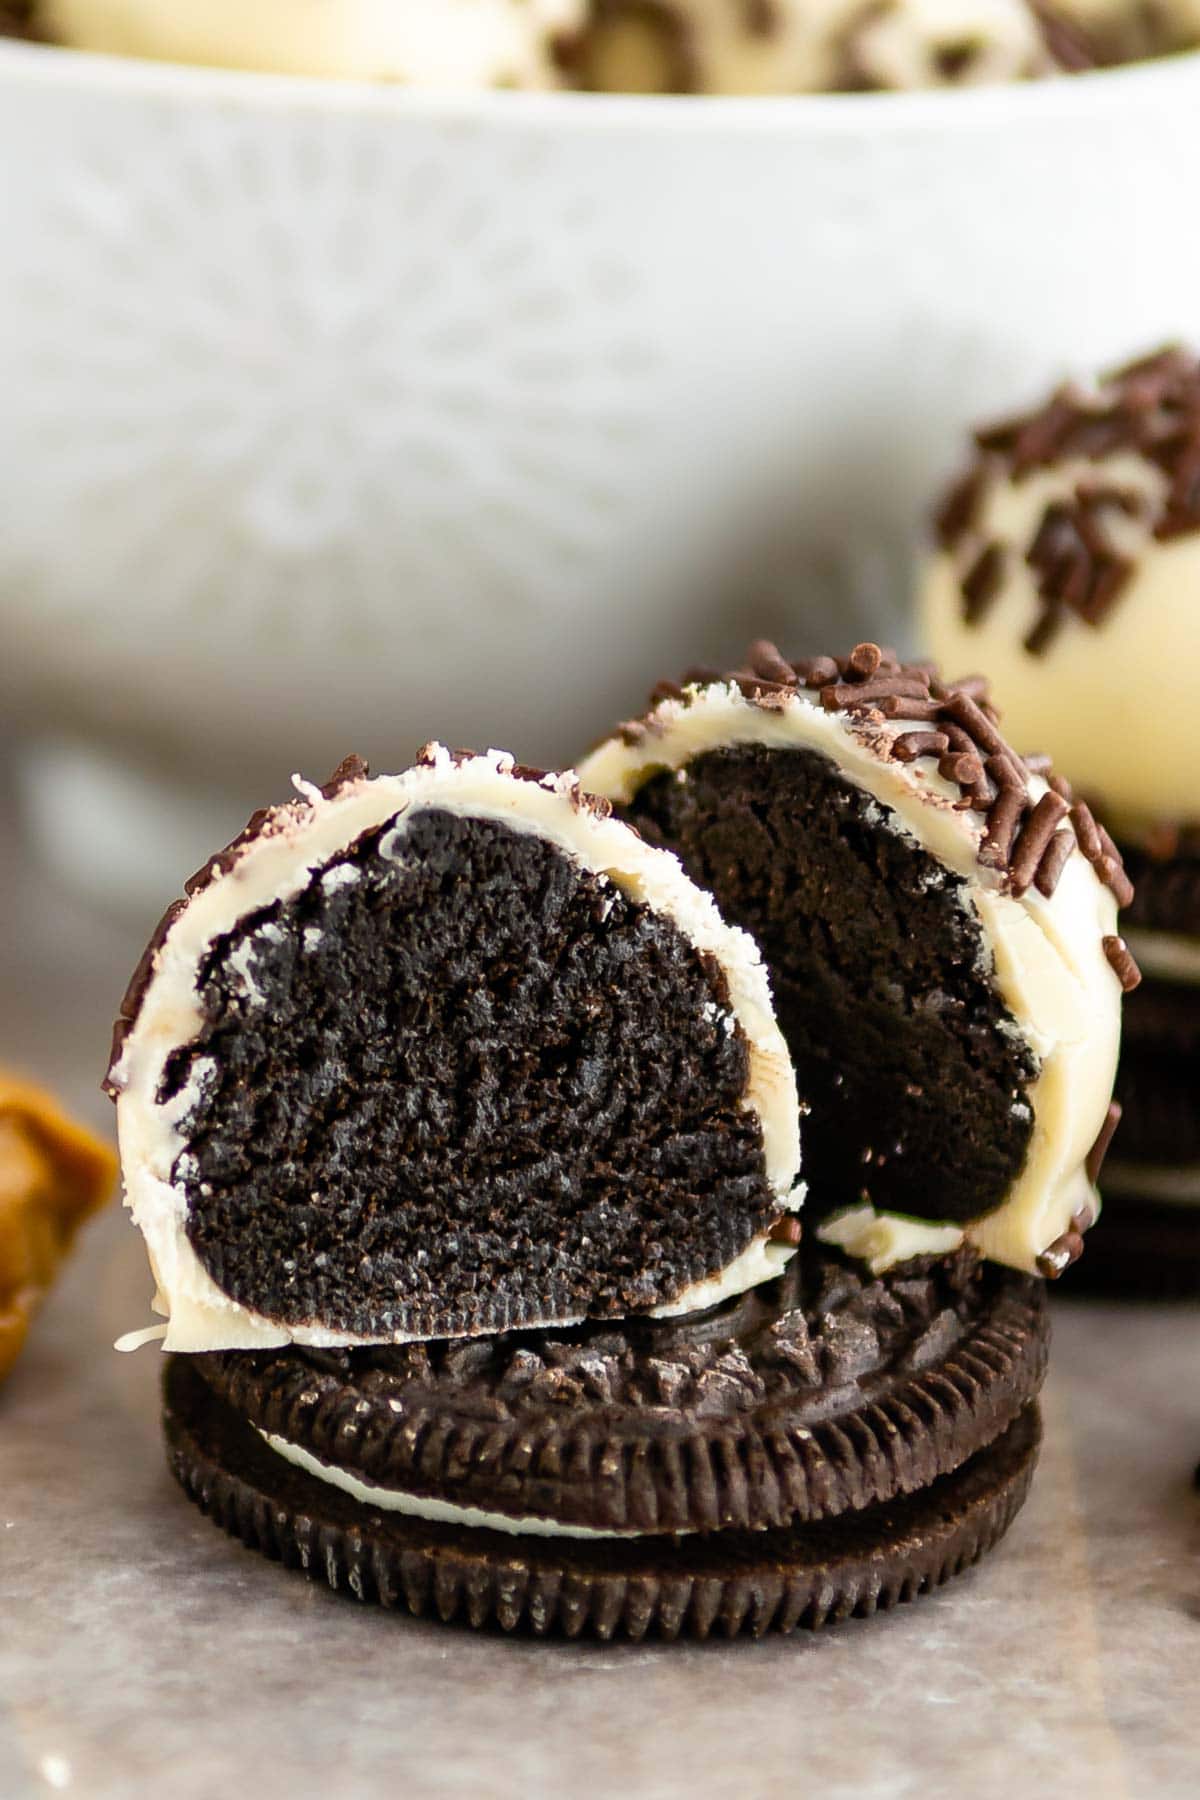 Oreo Truffles Recipe (with coating options) - Crazy for Crust